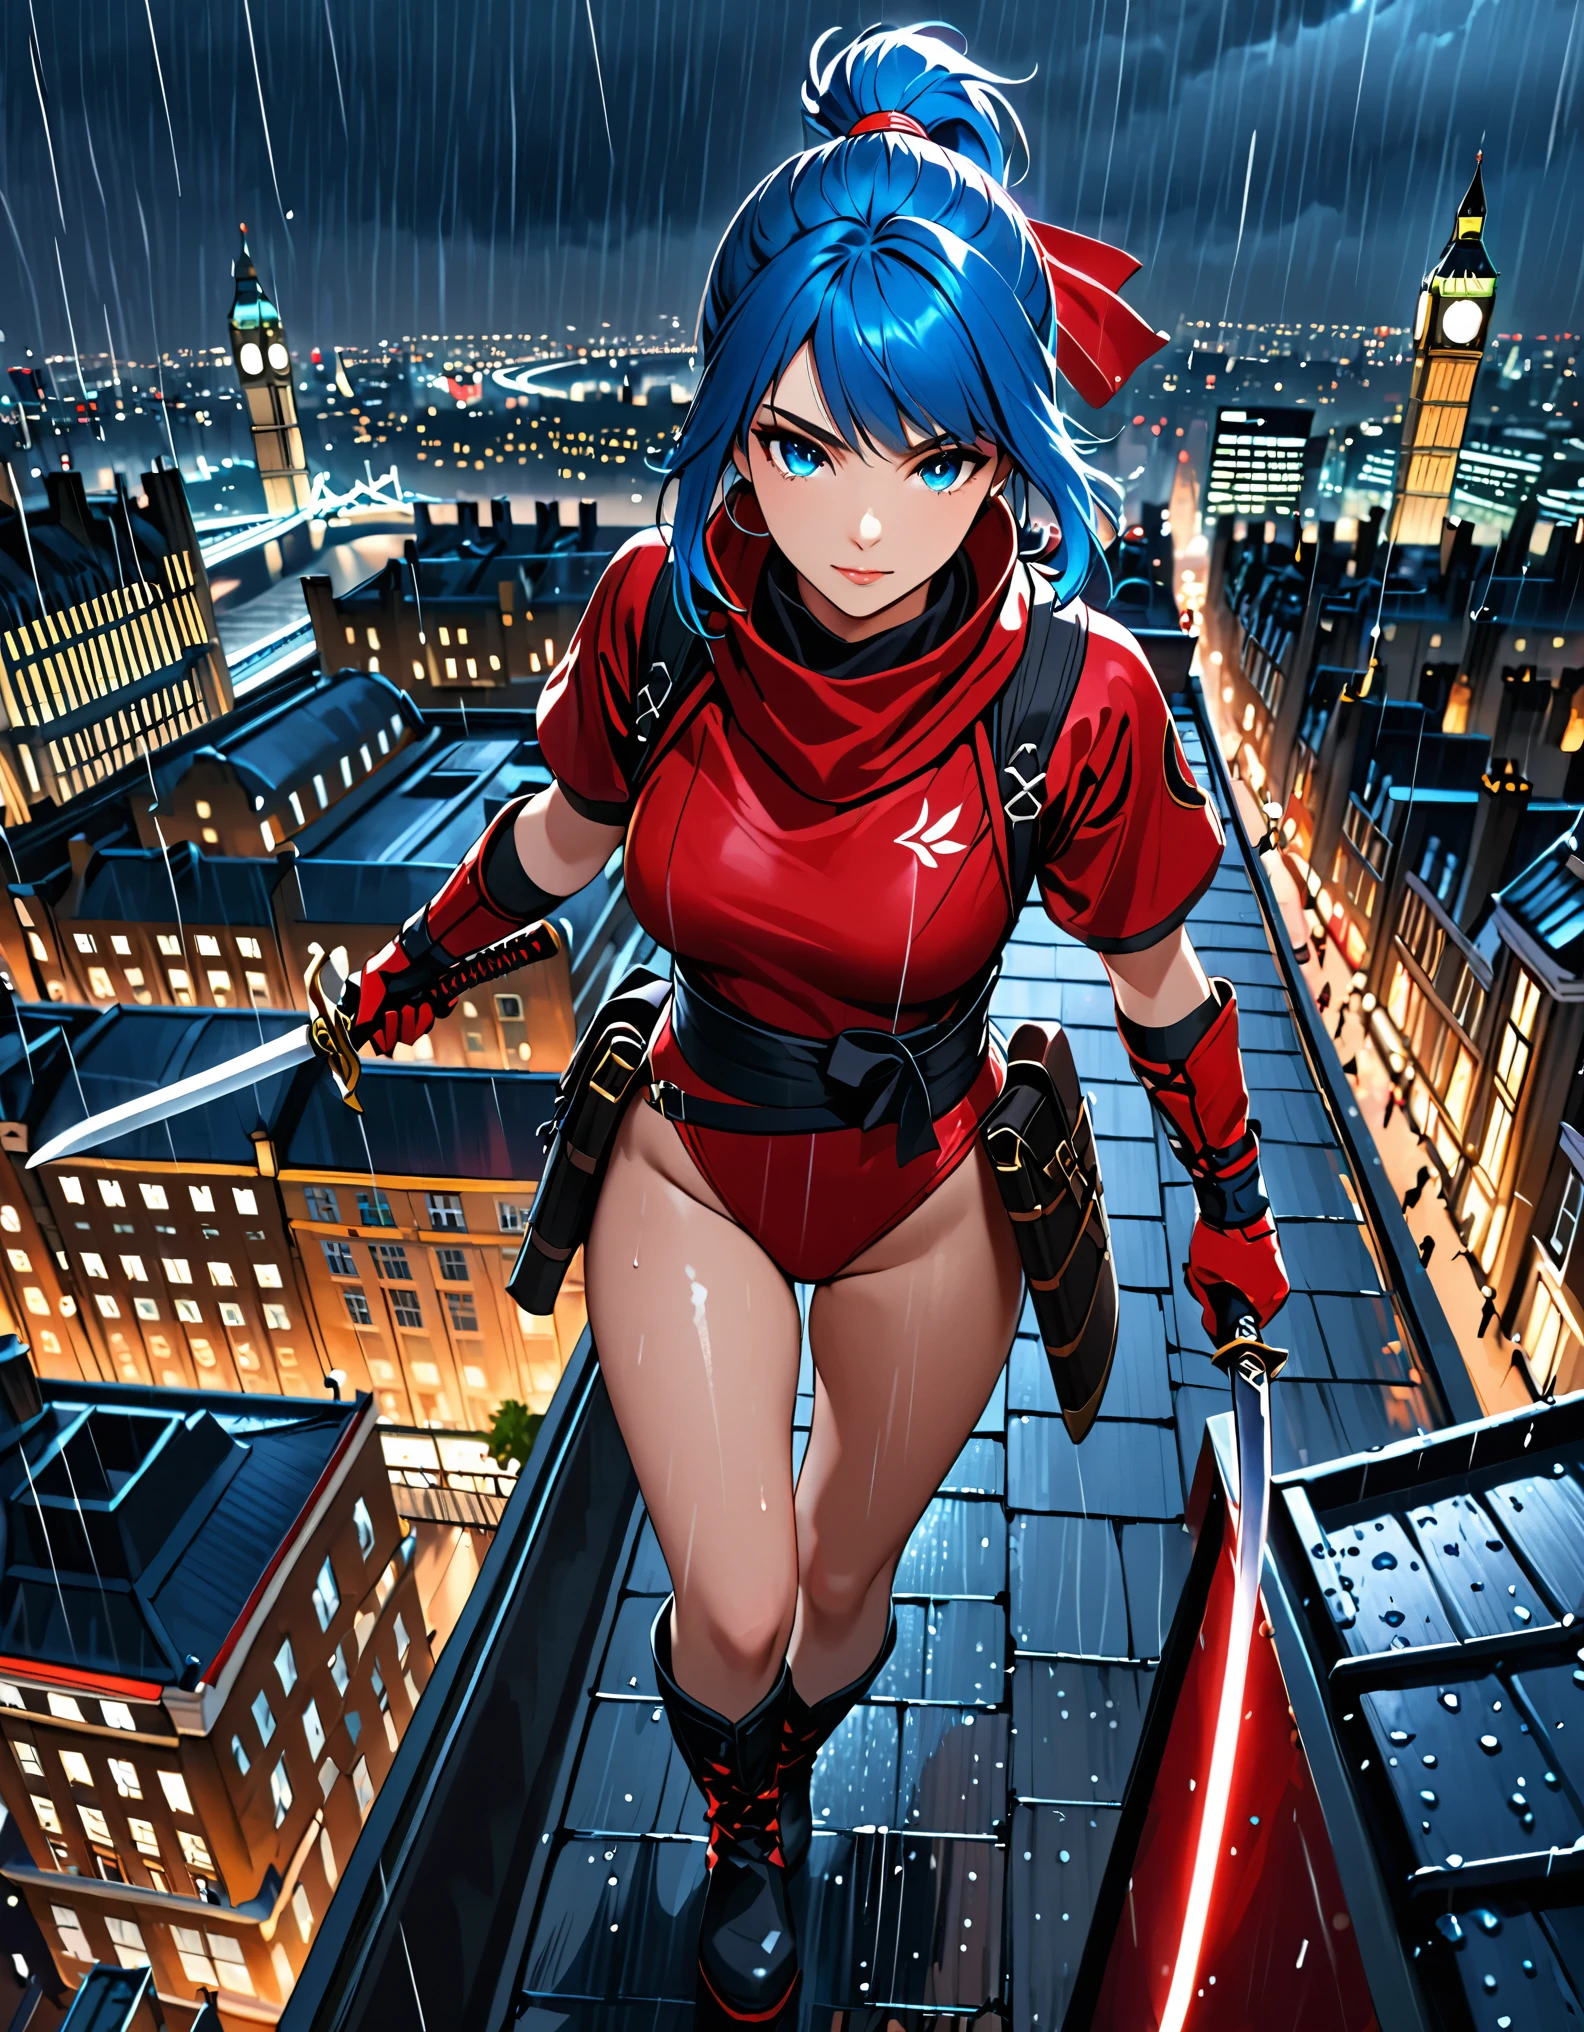 masterpiece, best quality, semi-realistic, solo, solo focus 1girl, blue hair, short hair, ponytail hair, cyan eyes, beautiful detailed eyes, beautiful detailed face, stoic, professional, ninja, red leotard, red tactical gloves, bare legs, matching boots, using daggers, london cityscape, rooftop, dutch angle, night, rain, running to viewer, noir atmosphere.